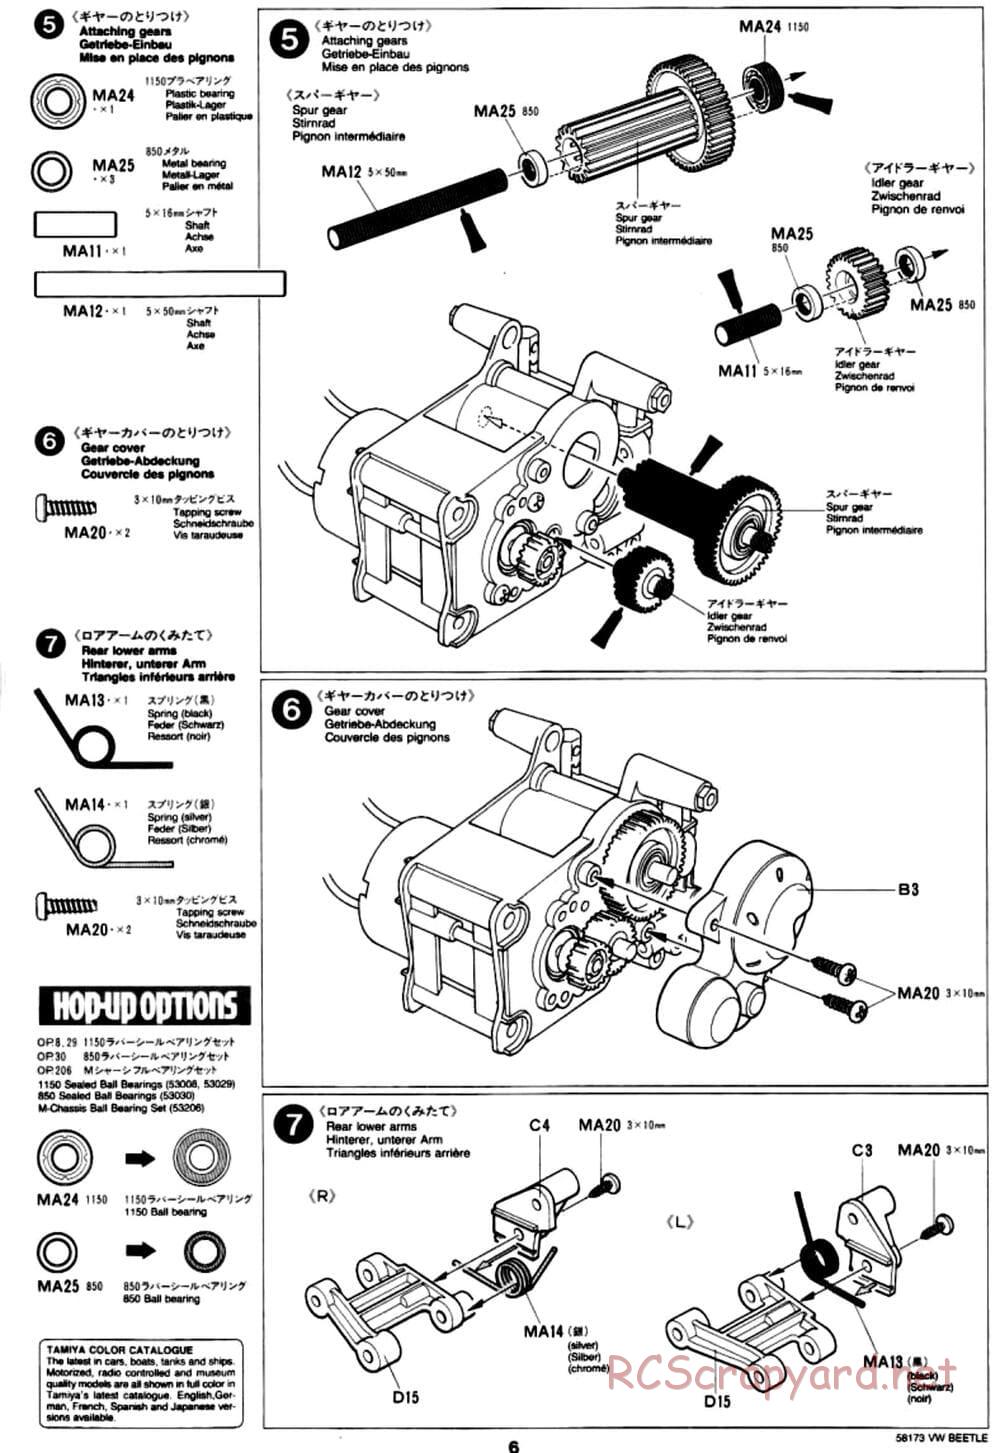 Tamiya - Volkswagen Beetle - M02L Chassis - Manual - Page 6